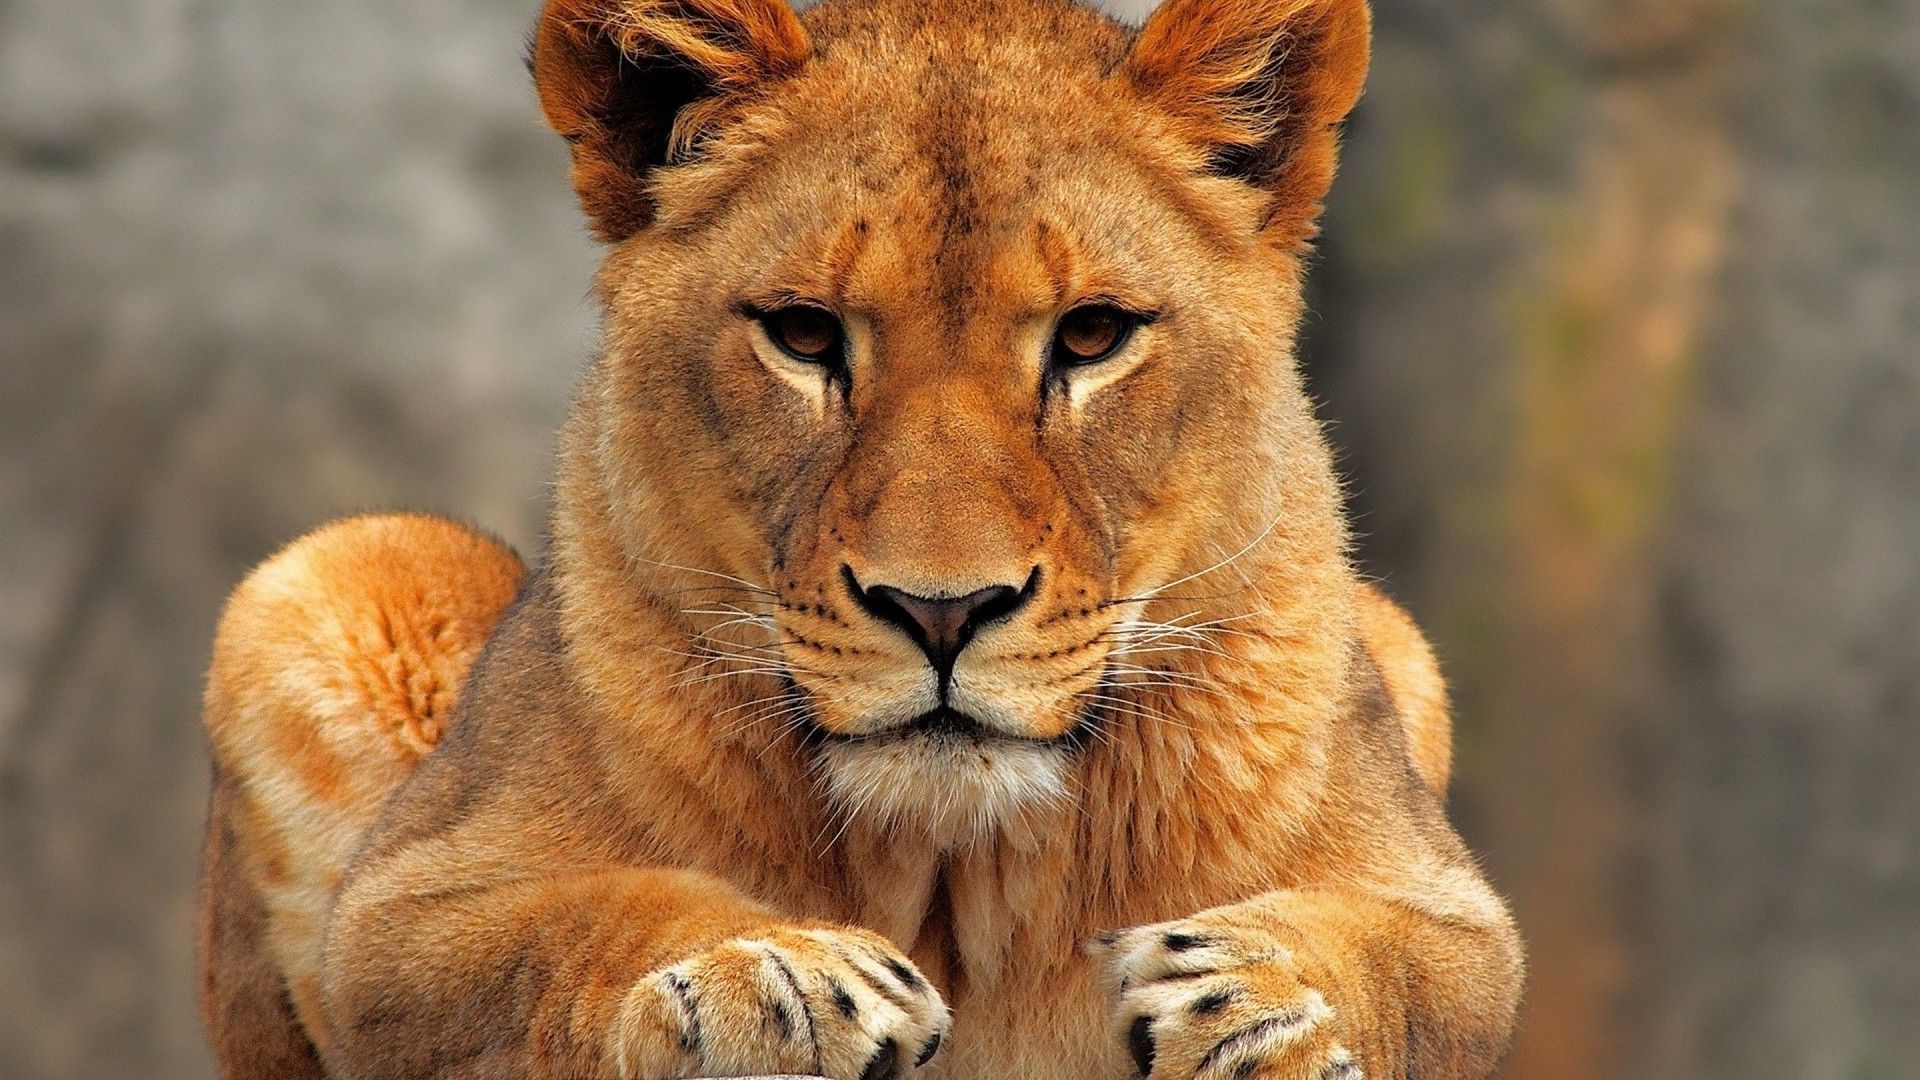 Beautiful lioness face | Wild cats | Pinterest | Lions, Cat and ...